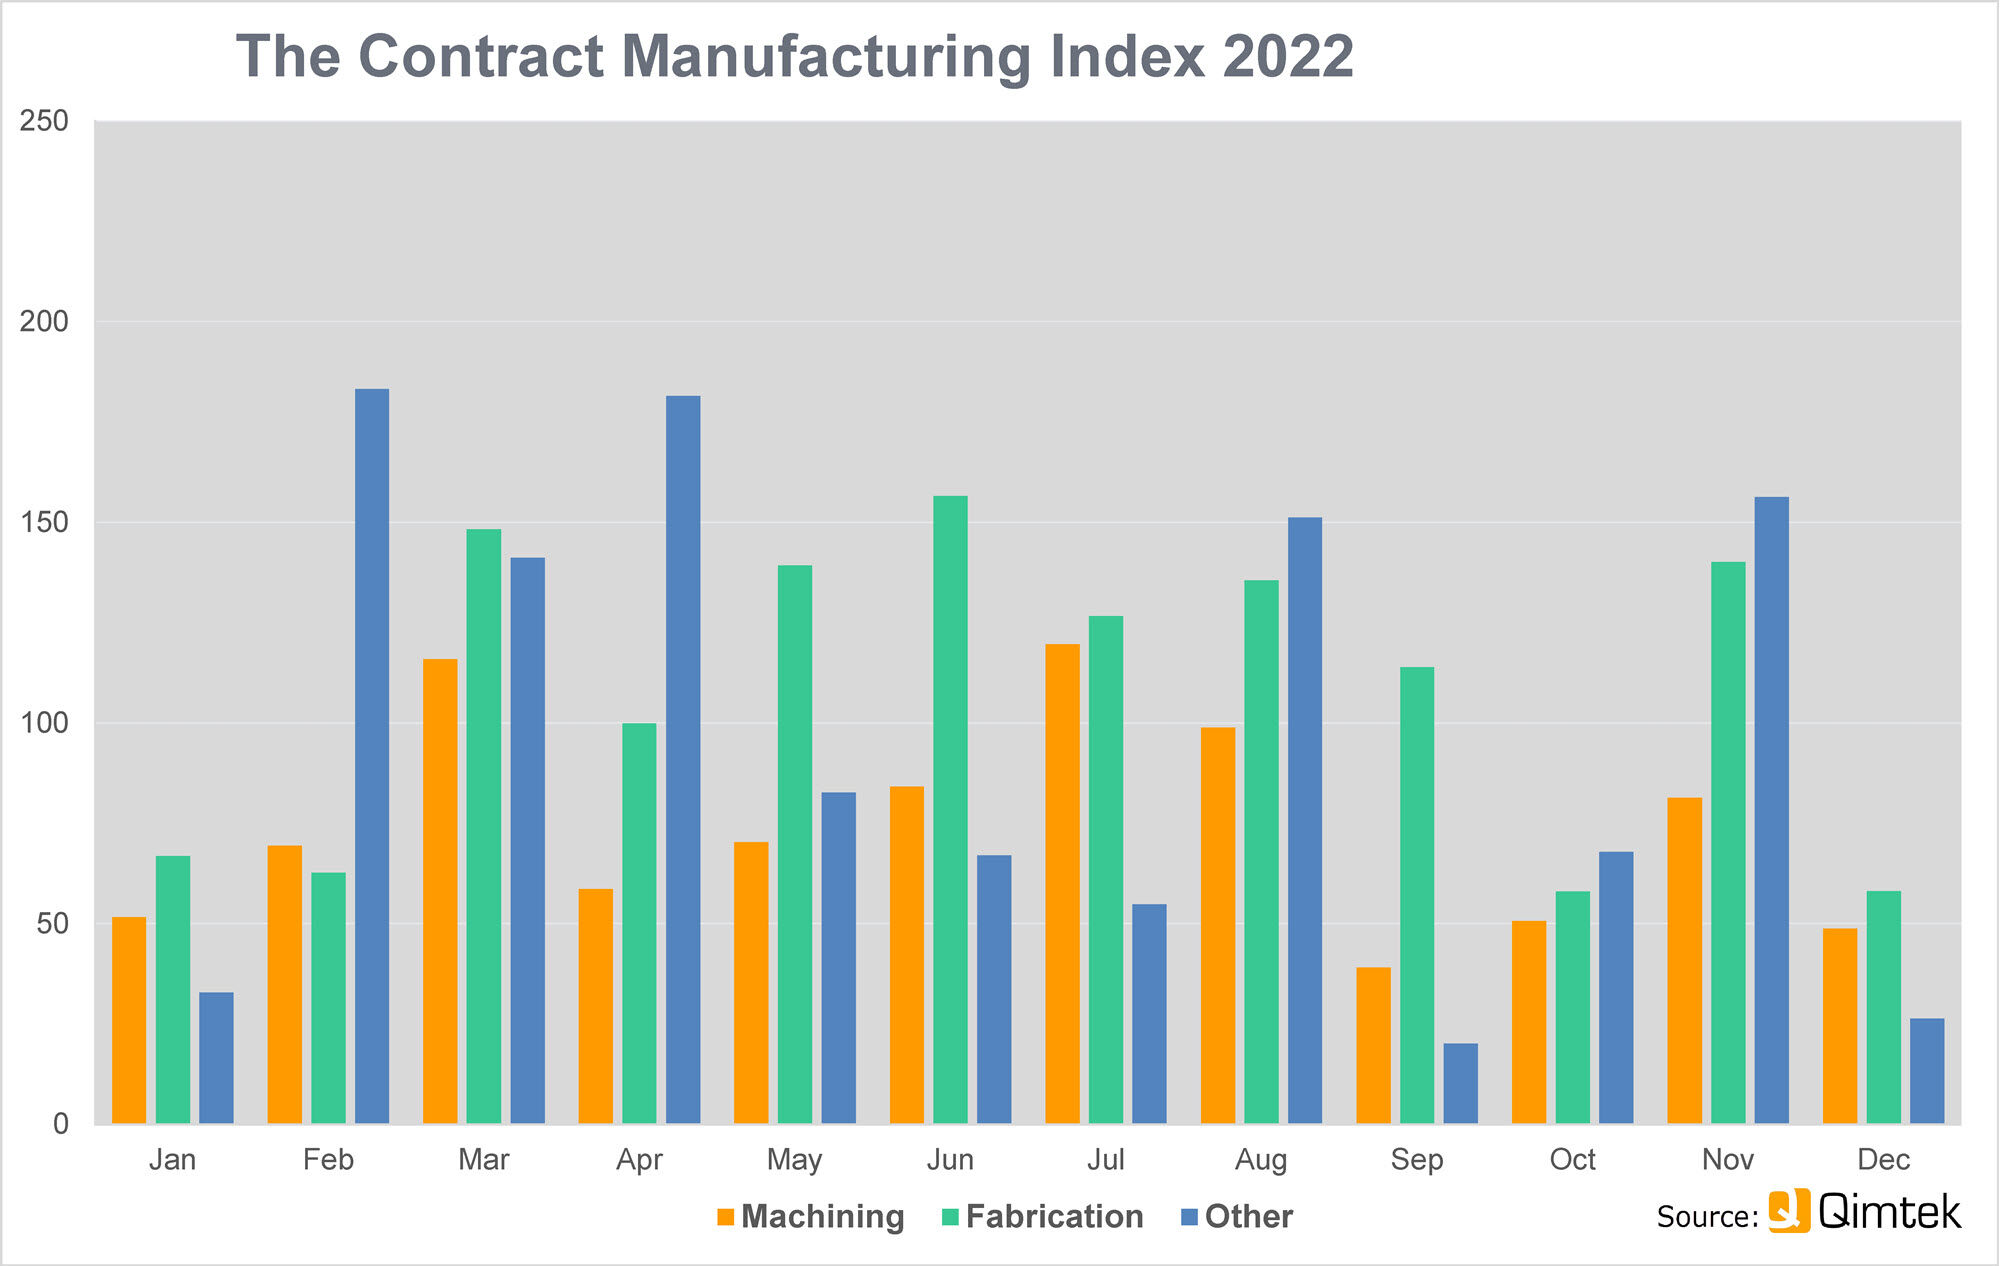 Poor final quarter for subcontract manufacturing